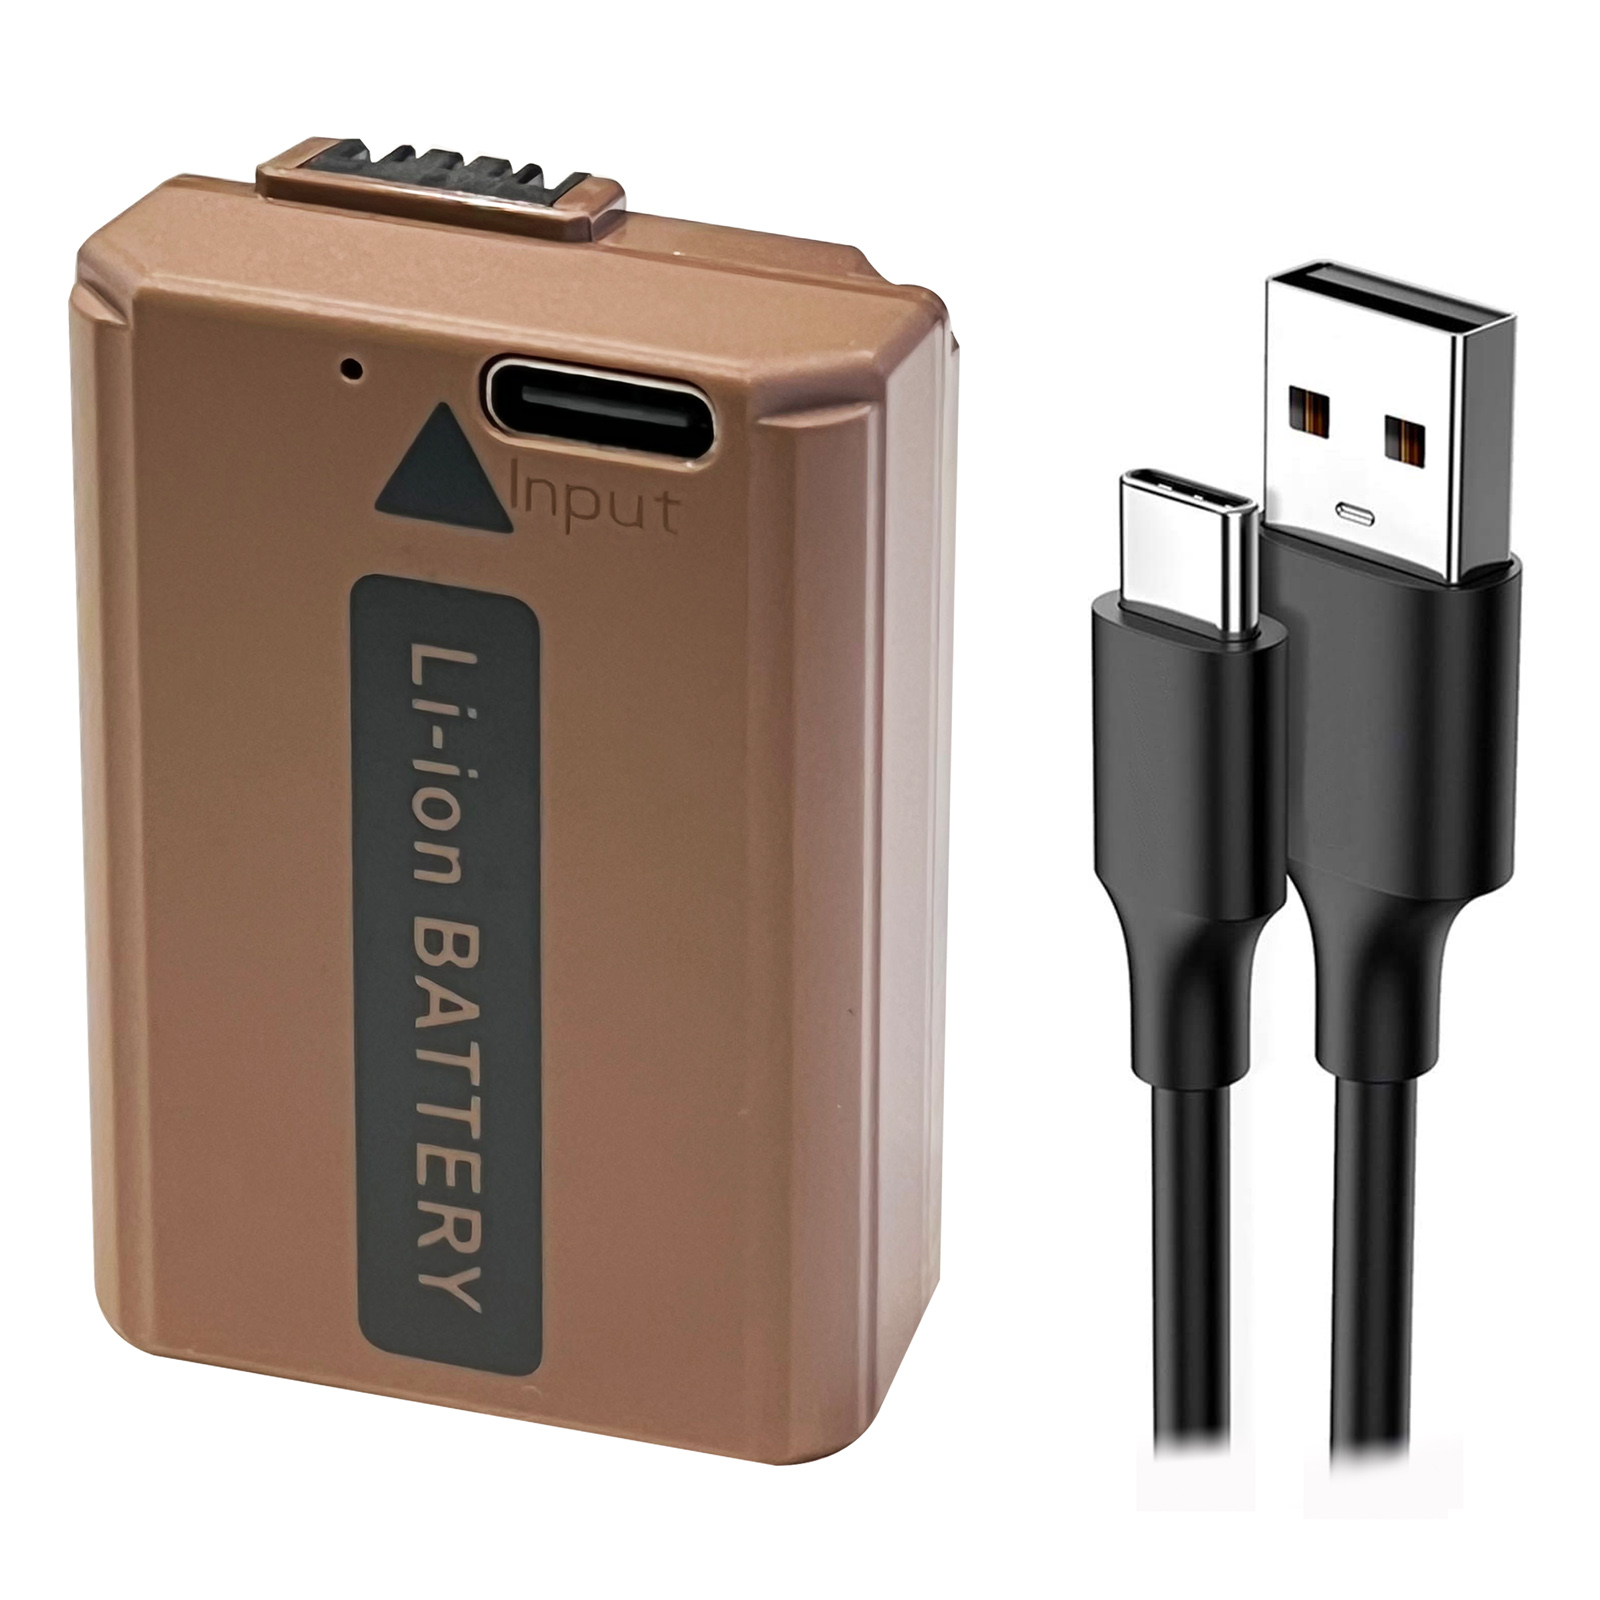 Synergy Digital Camera Battery, Compatible with Sony NP-FW50 Digital Camera Battery (LI-ion, 7.2V, 1500mAh) - Built-In USB-C Charging Feature, includes a 24 inch USB Type-C charging cable